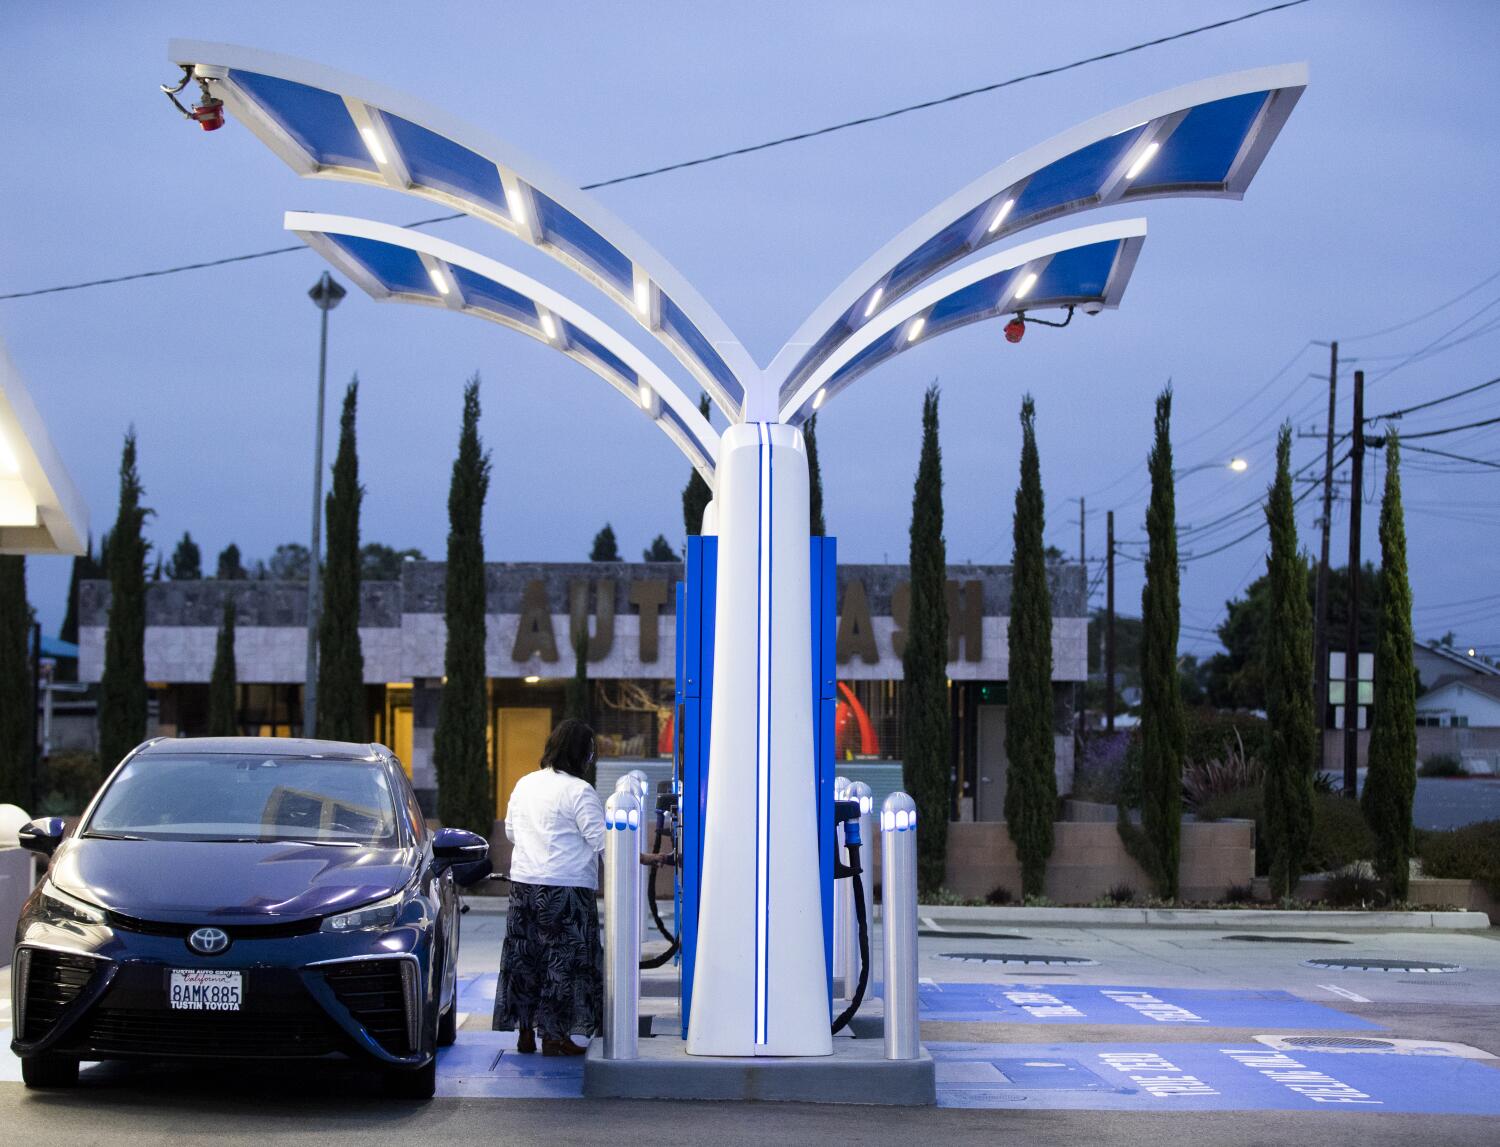 California to get up to $1.2 billion in federal funds to expand hydrogen energy projects